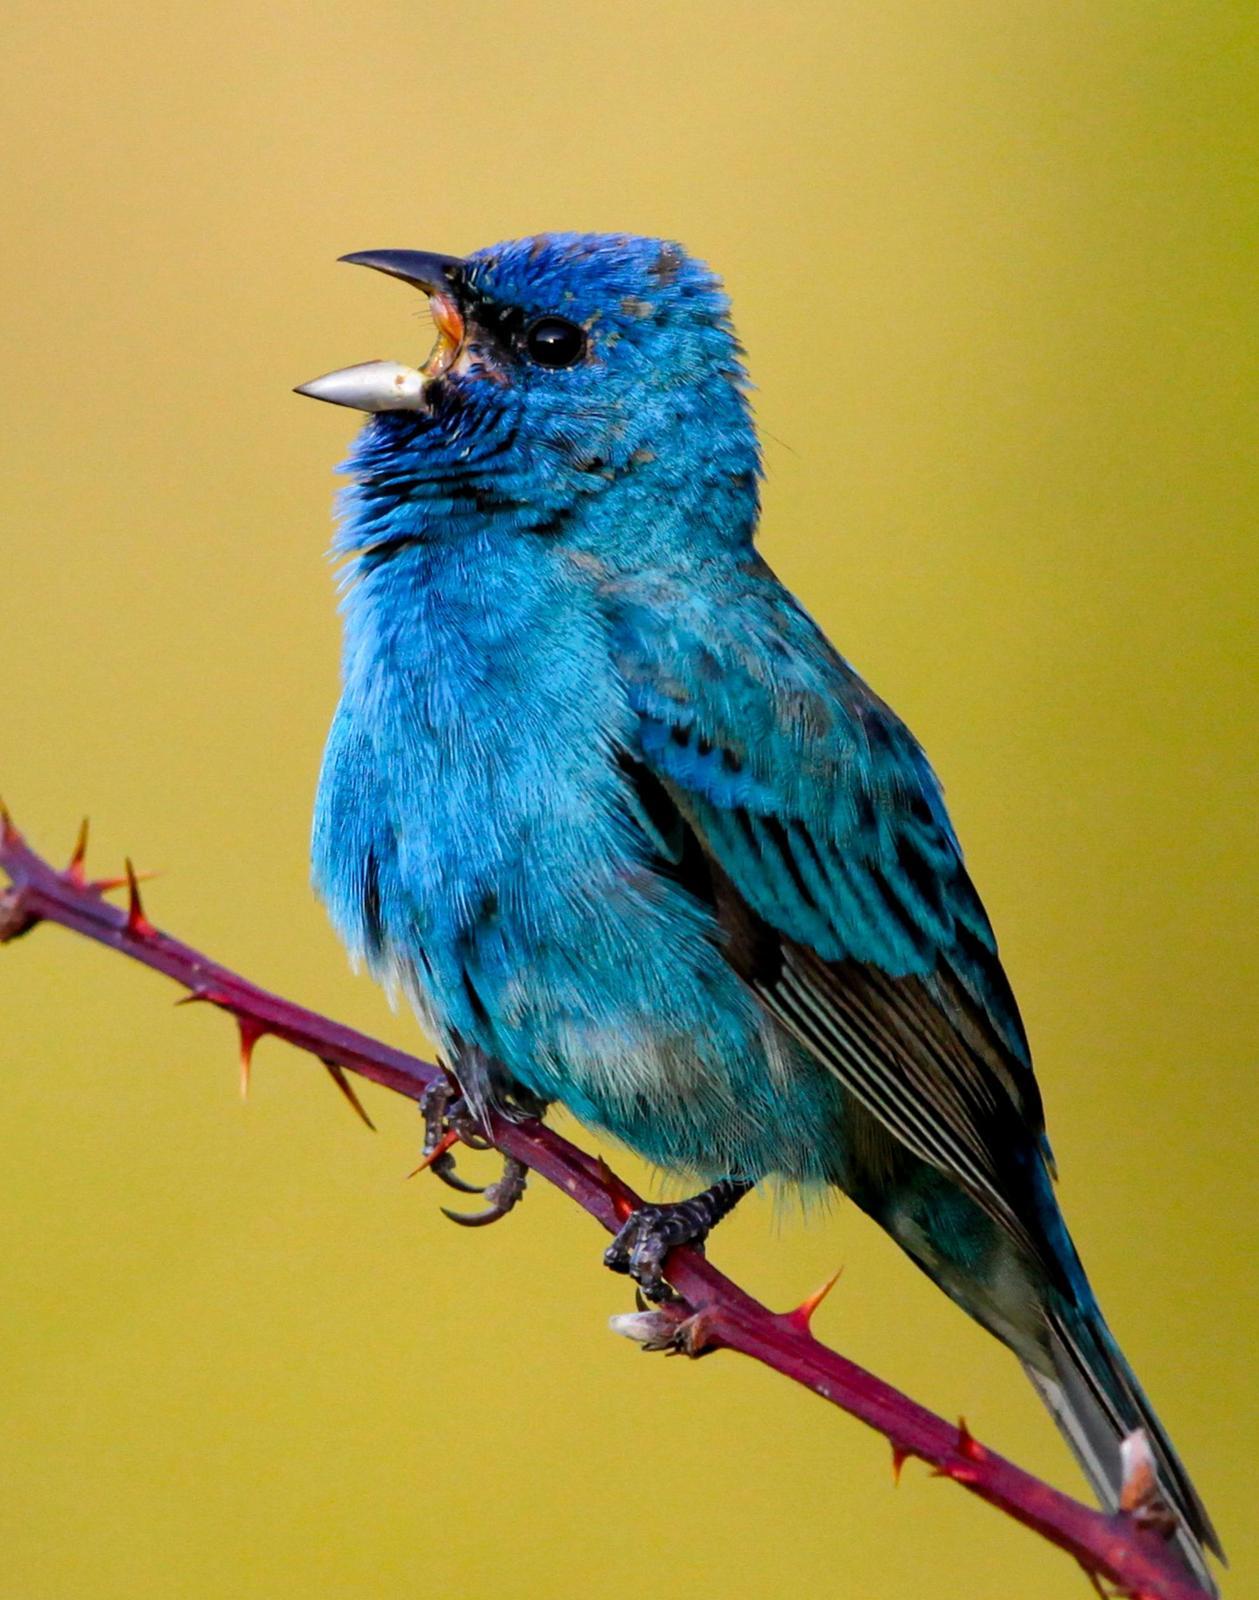 Indigo Bunting Photo by Lucy Wightman